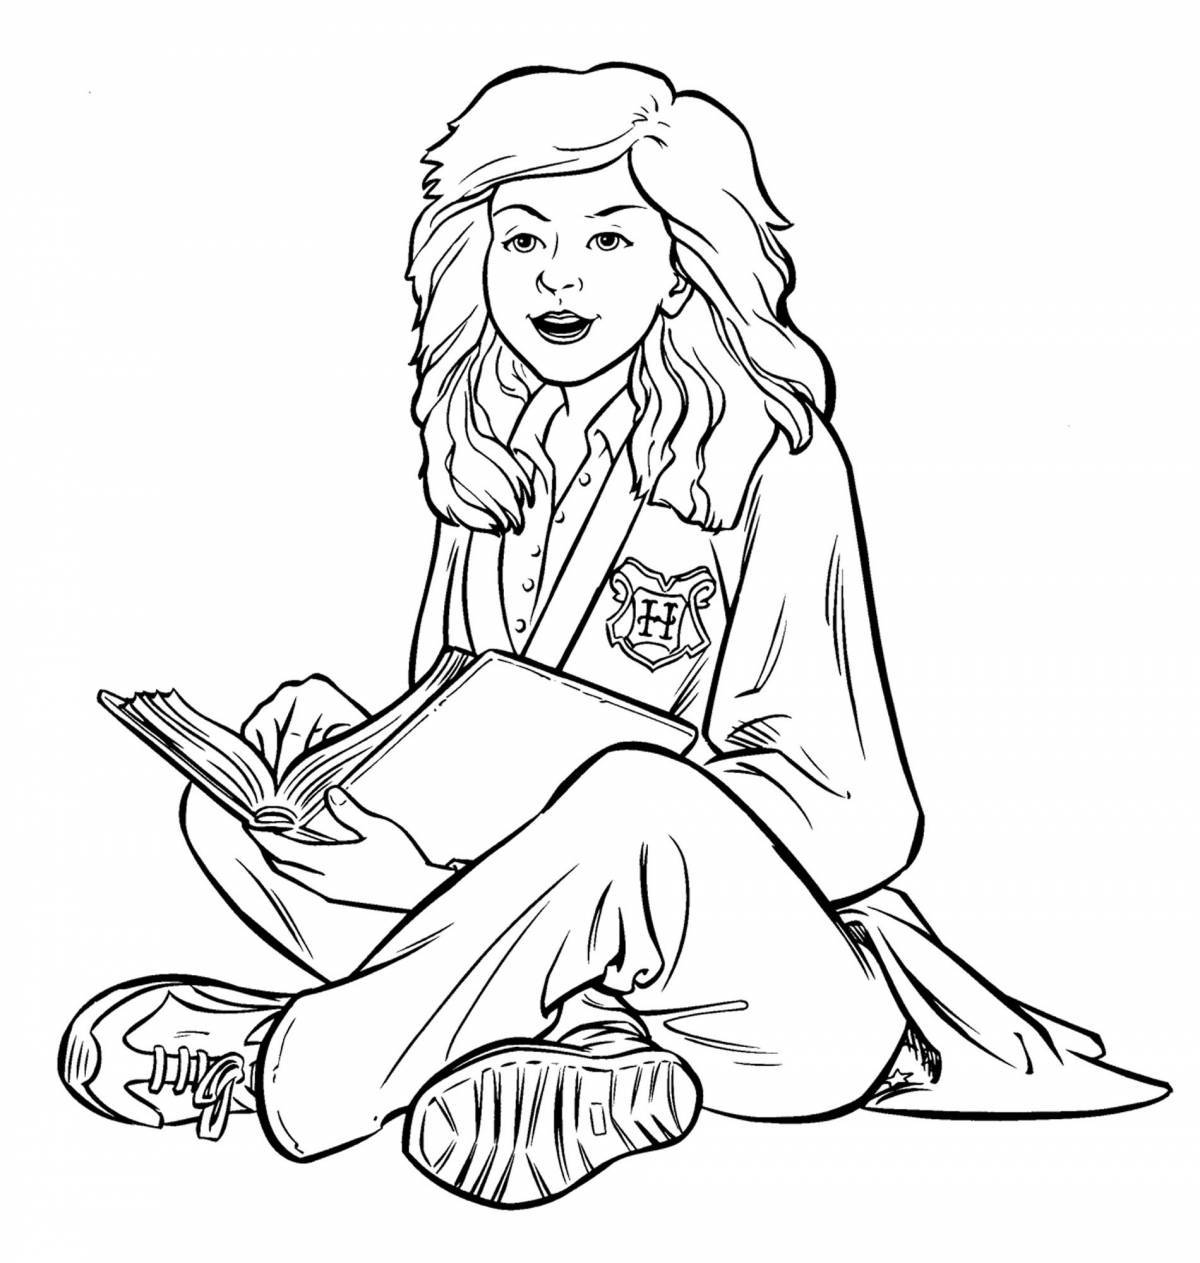 Hermione smart coloring